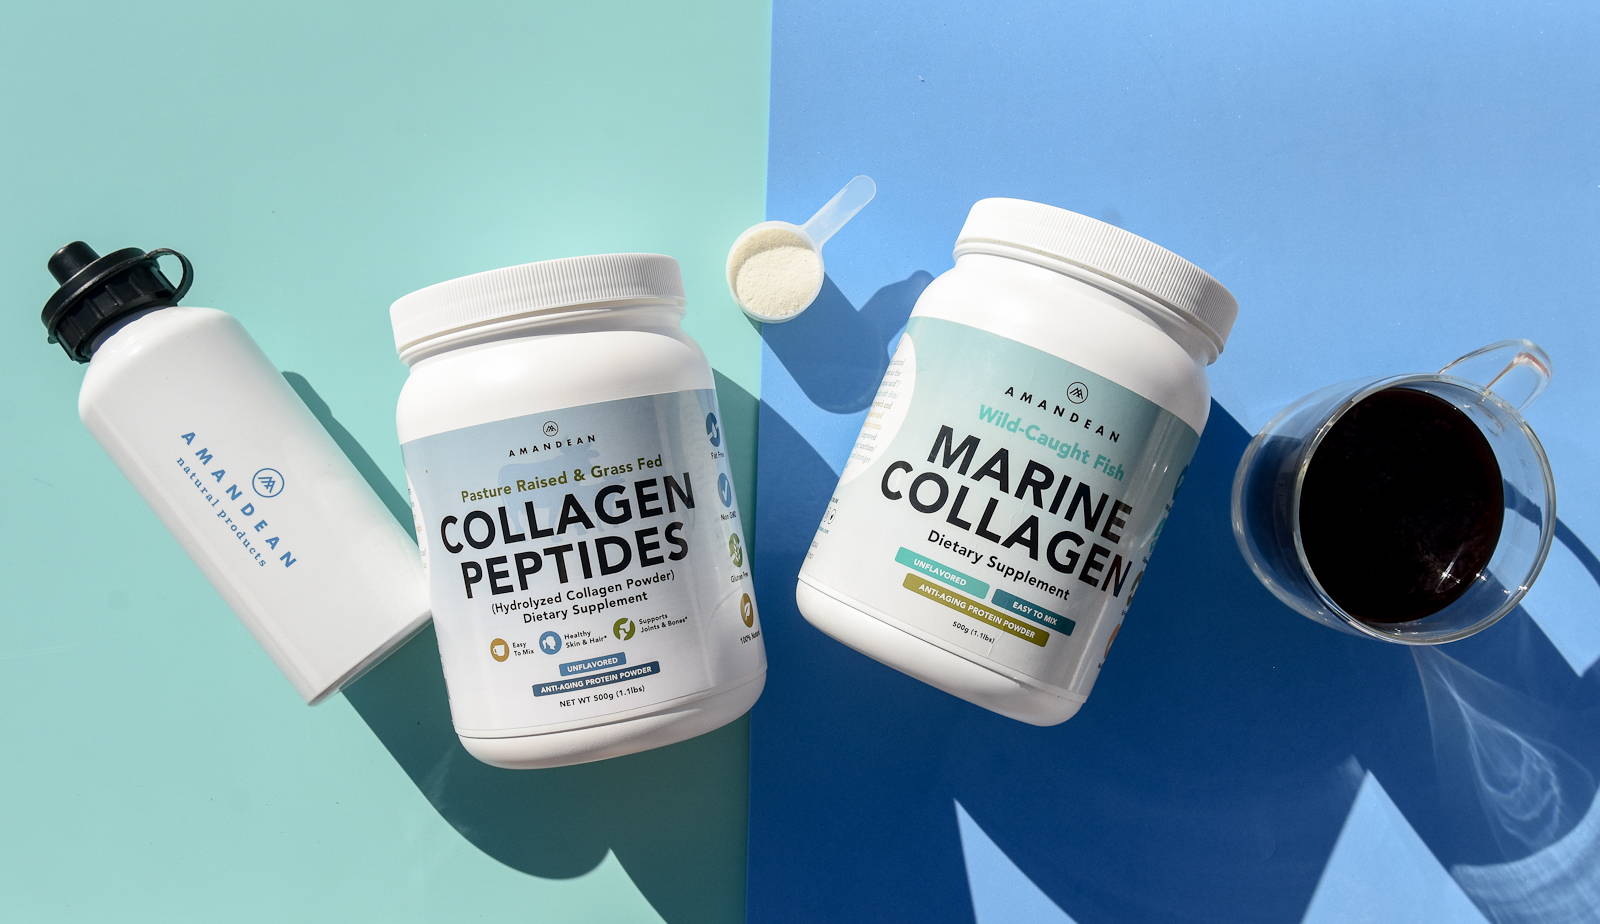 All-Natural Collagen Nutrition